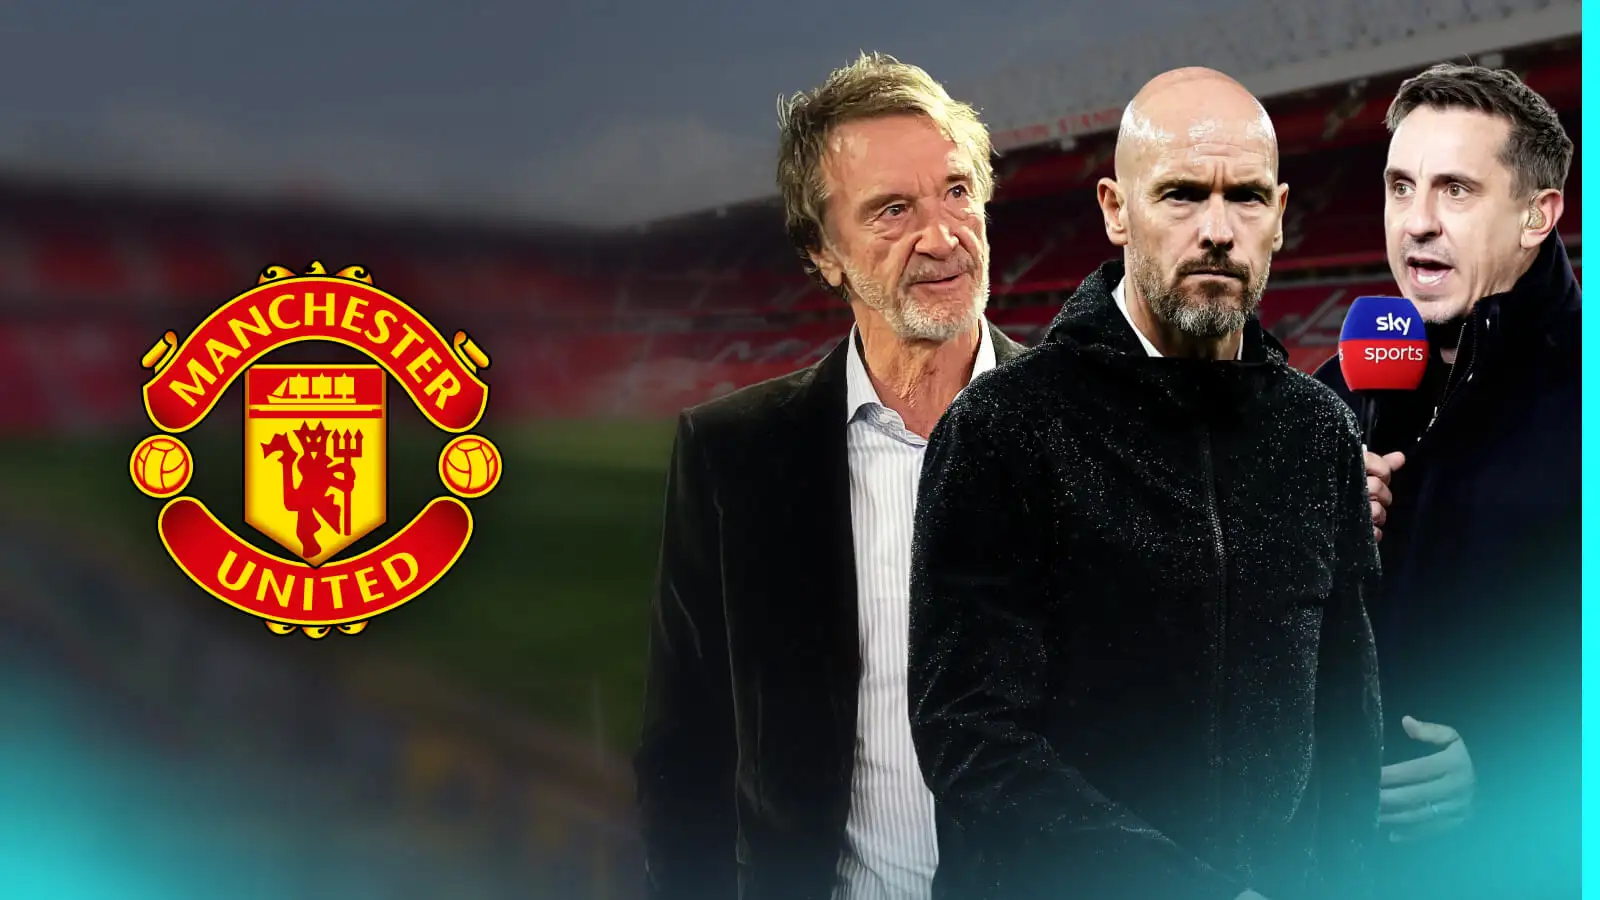 Individual Utd co-owner Sir Jim Ratcliffe, Erik 10 Hag and also Gary Neville